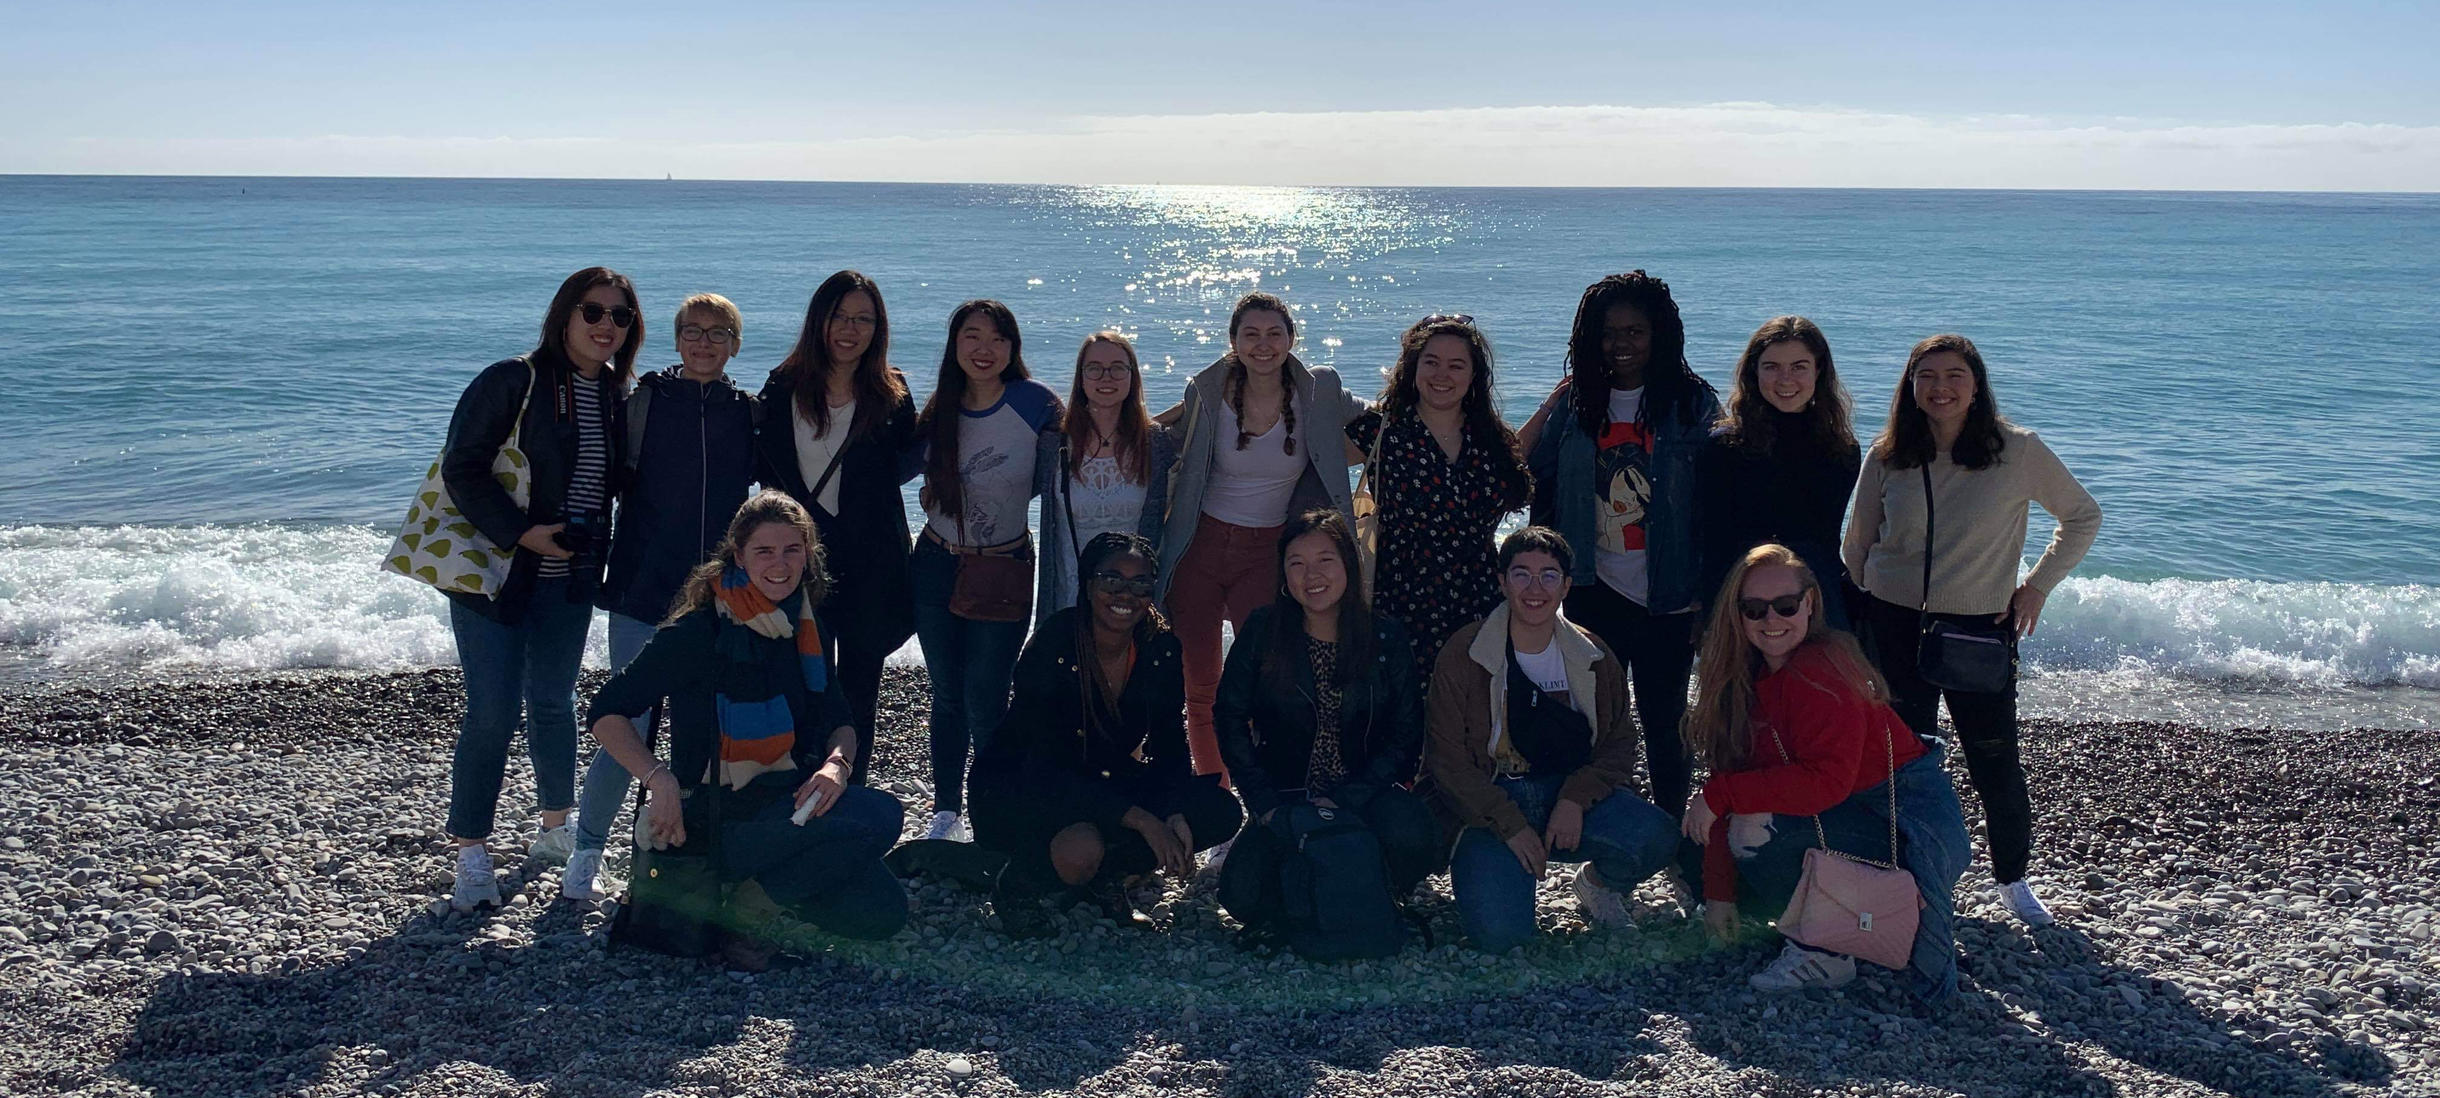 A smiling group of Wellesley-in-Aix students on a beach with water behind them, facing the sun.